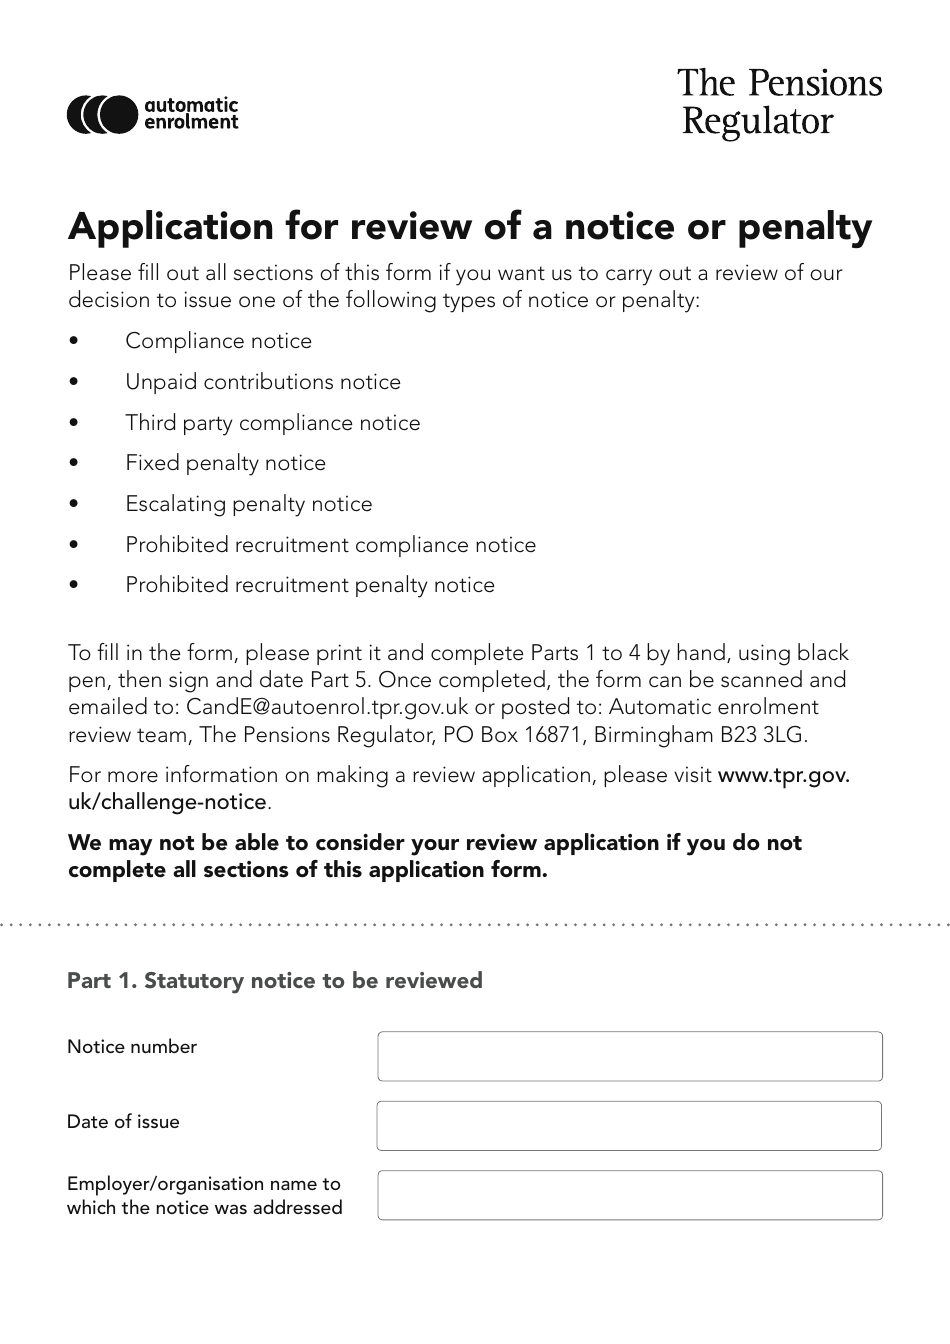 Application for Review of a Notice or Penalty - United Kingdom, Page 1